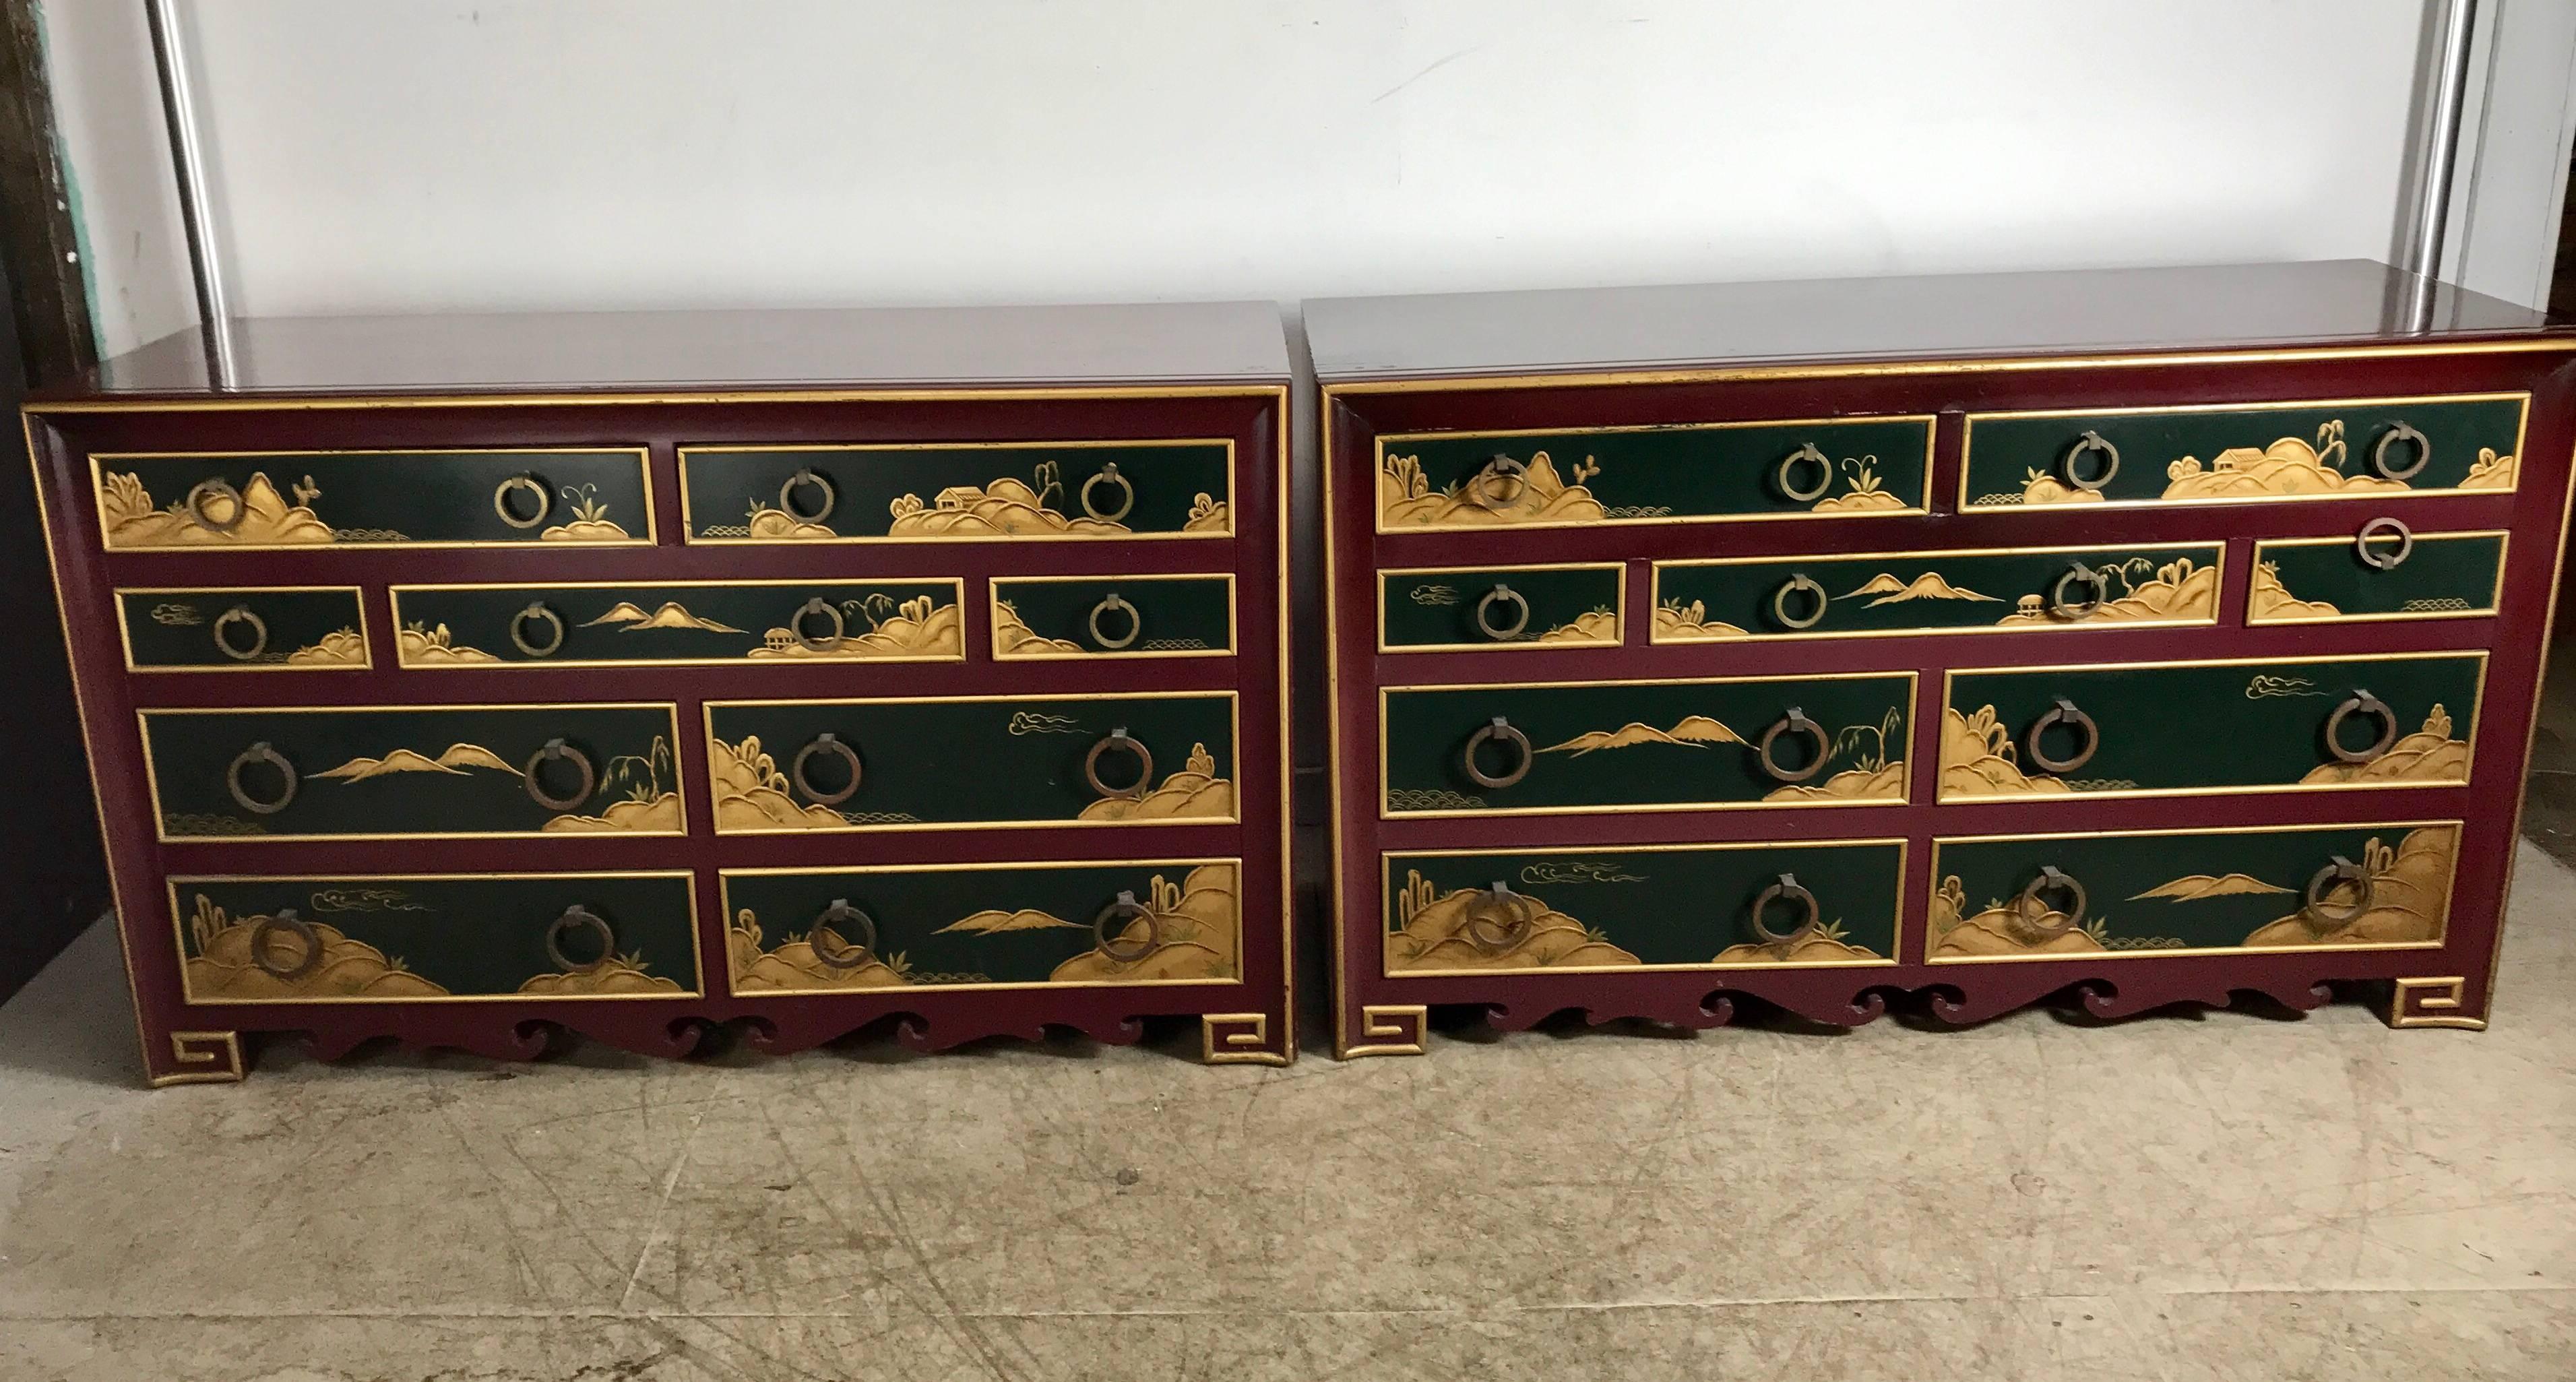 Pair of highly decorated lacquered nine-drawer chests or dressers, Stunning Japanese themed motif featuring burgundy and hunter green lacquer with gold relief detailing, solid brass graduated hand pulls, amazing quality and construction, attributed